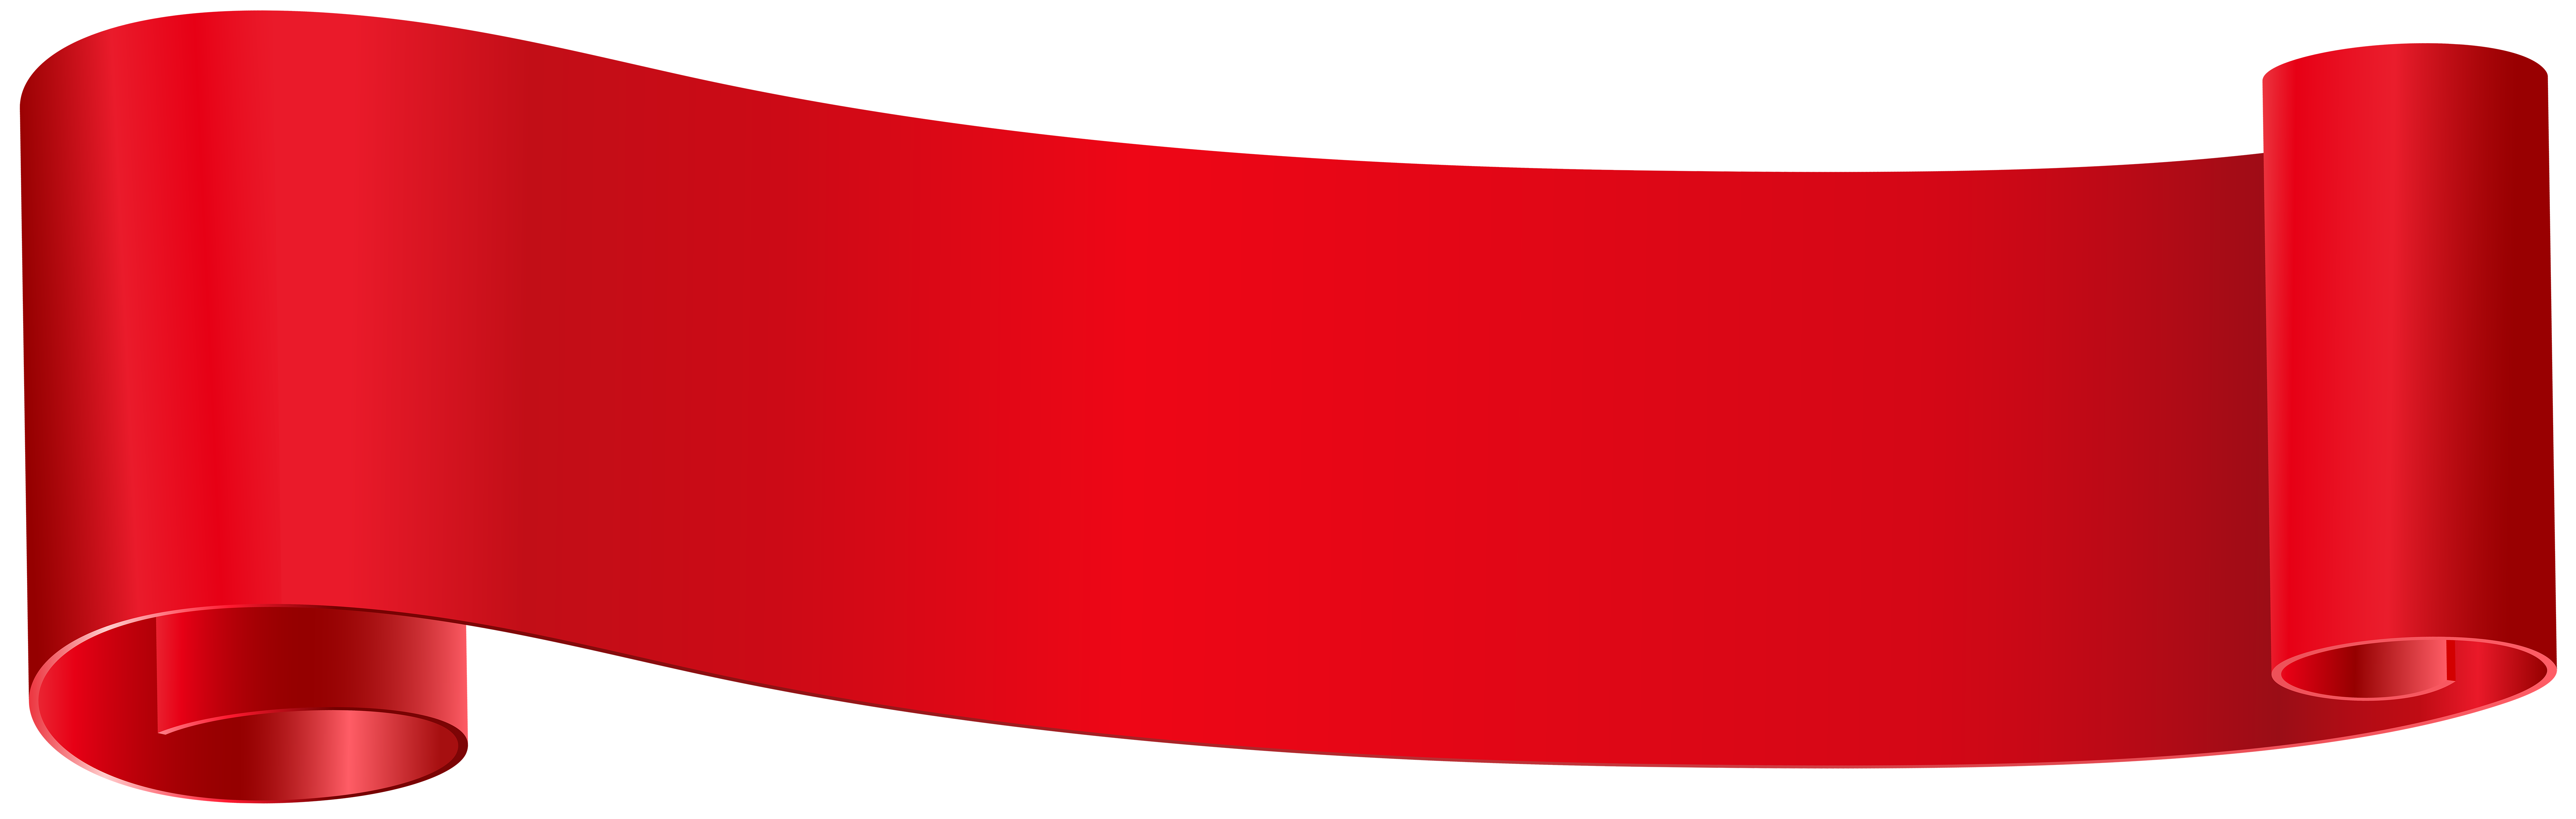 Red Banner Clip Art PNG Image